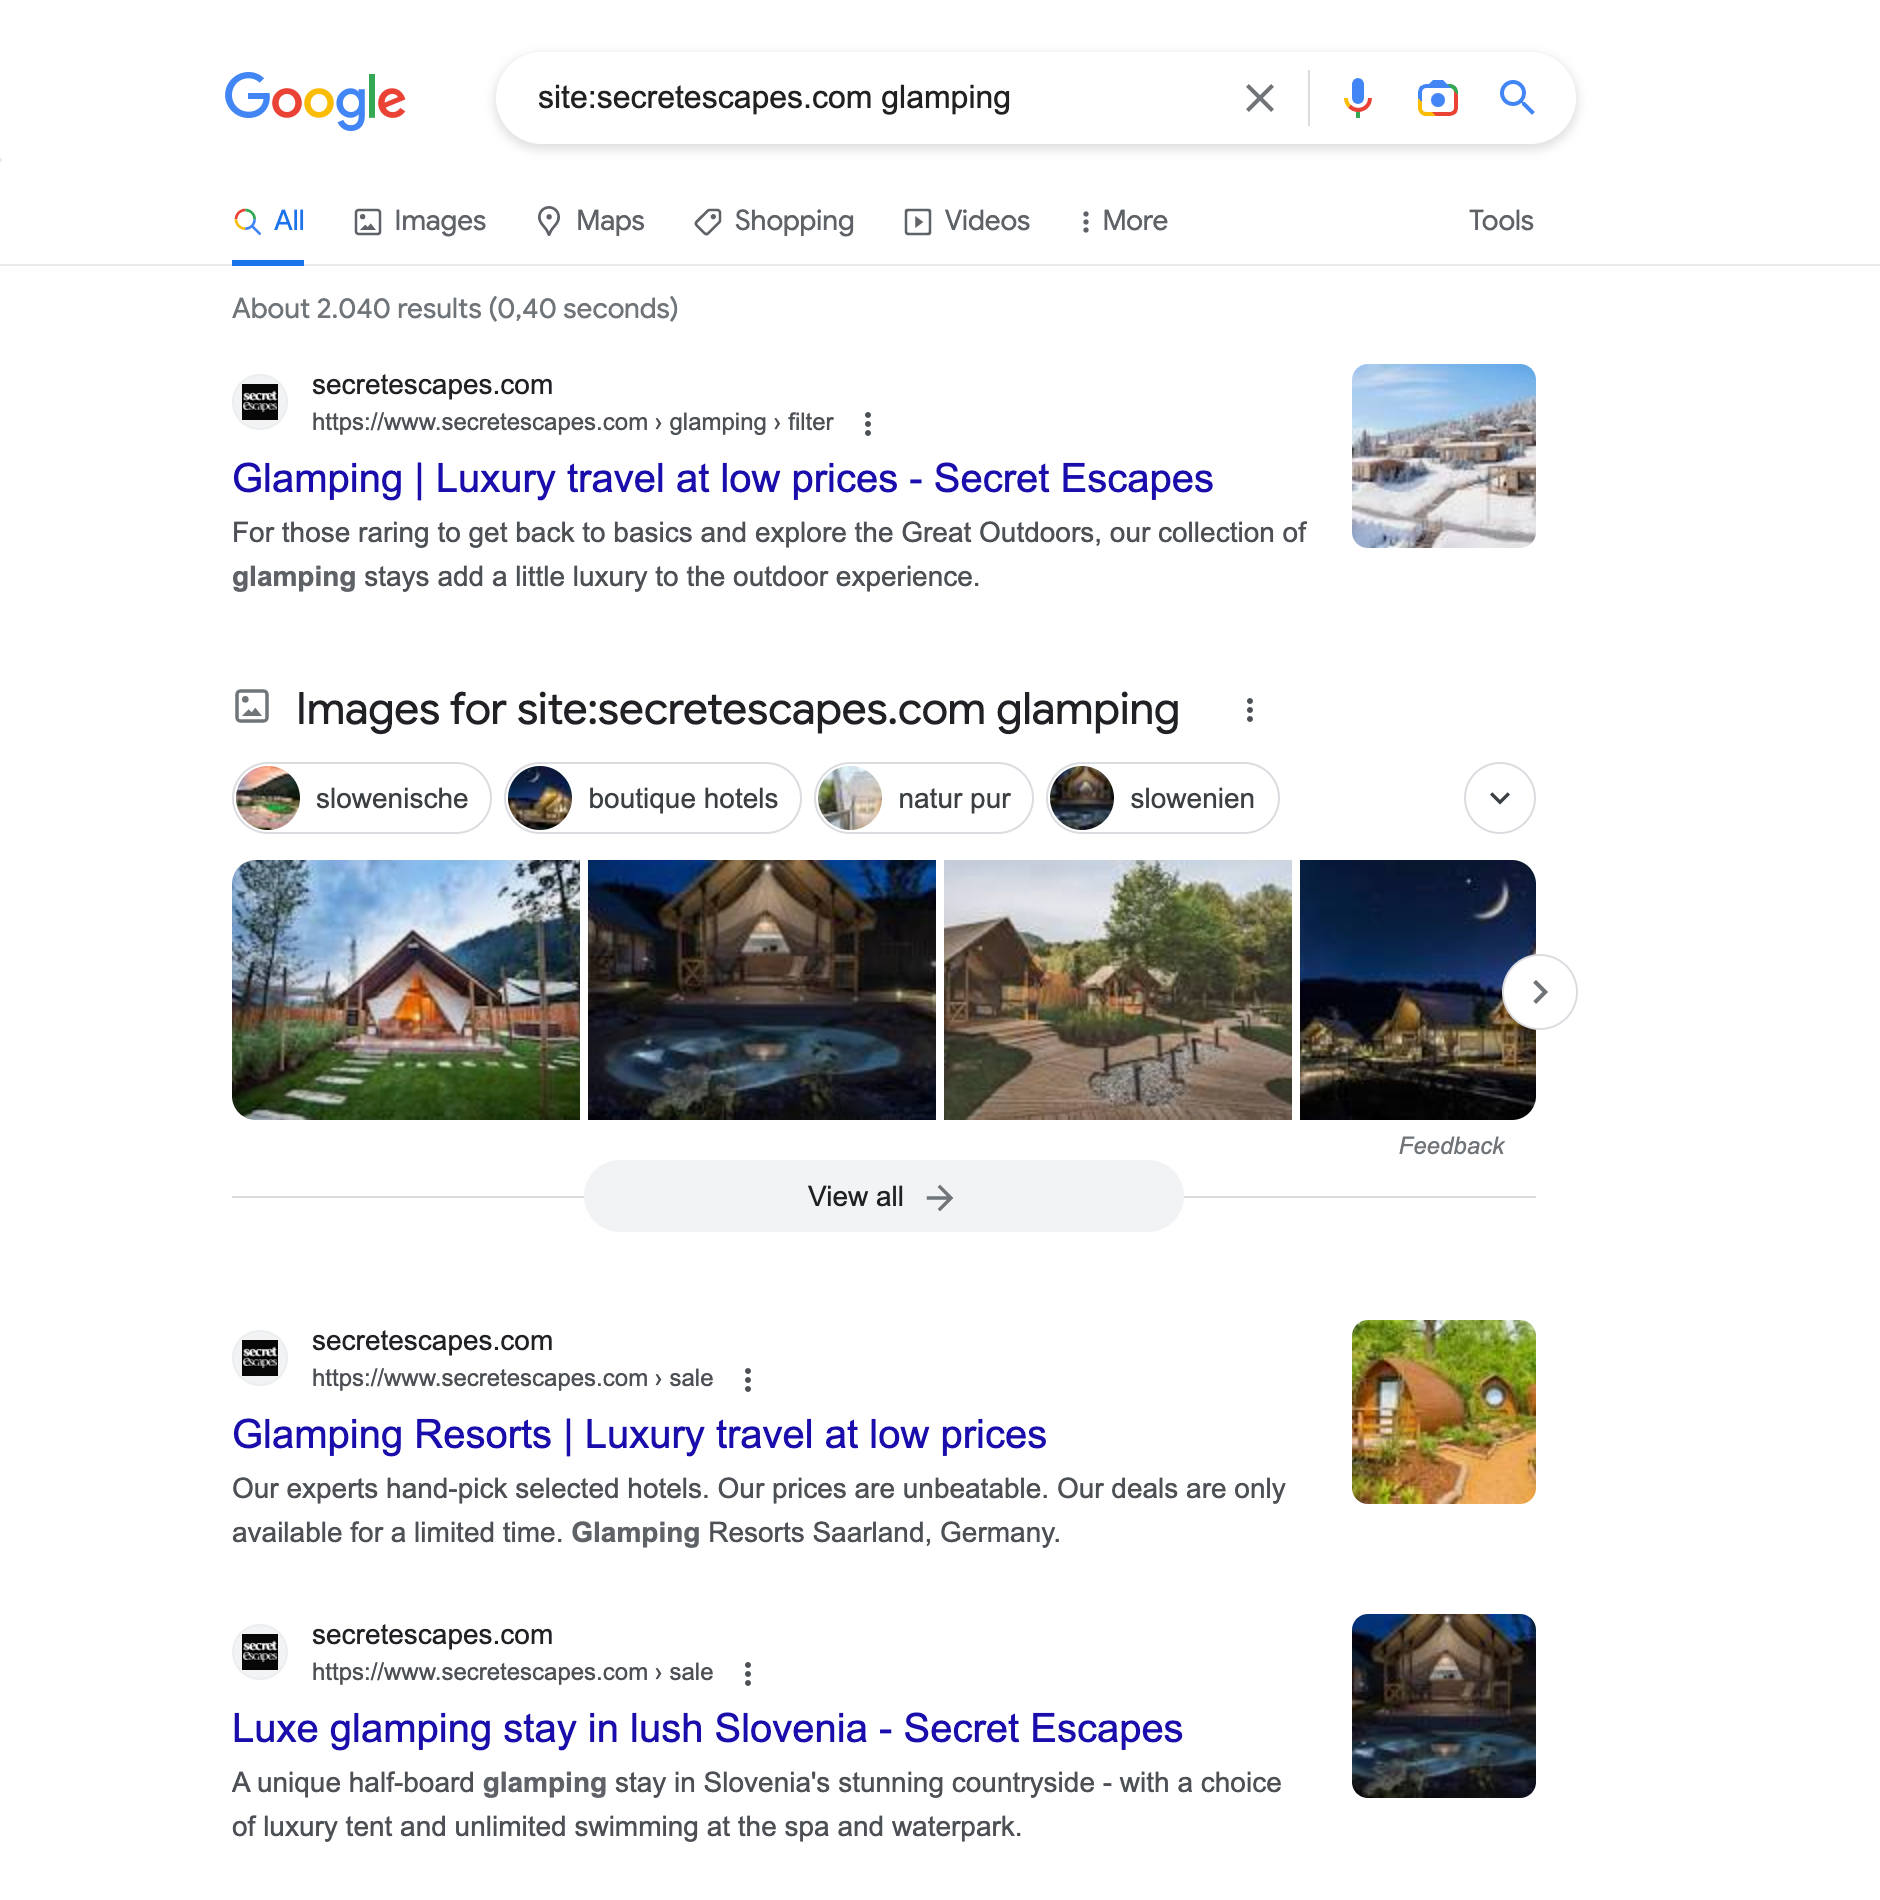 Google search results page for the query site:secretescapes.com glamping. Various subpages on secretescapes.com are displayed. Some are category pages, some are information pages, some are product pages.